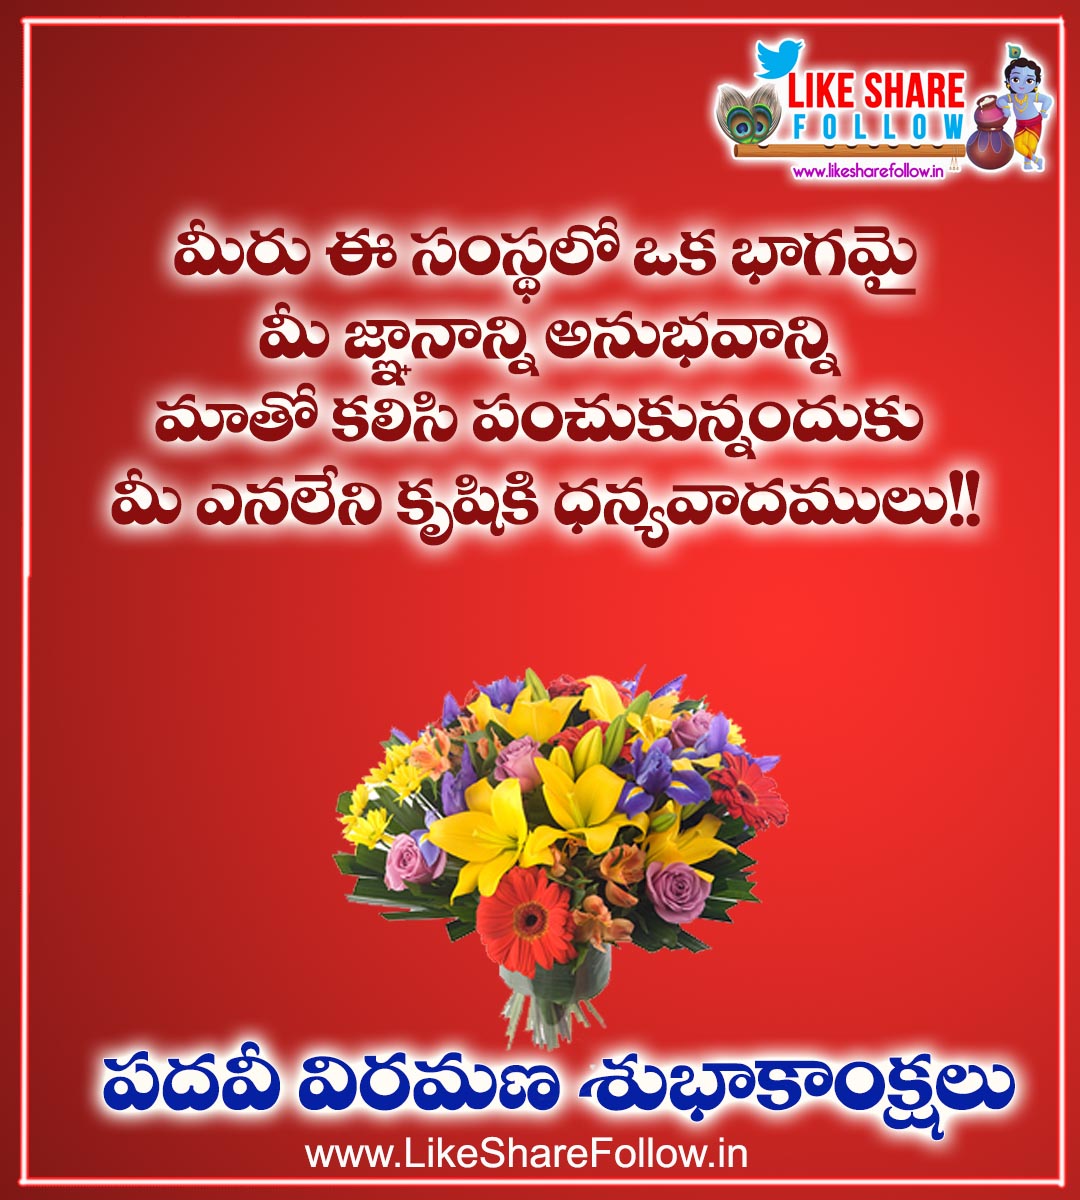 retirement wishes in telugu images download | Like Share Follow